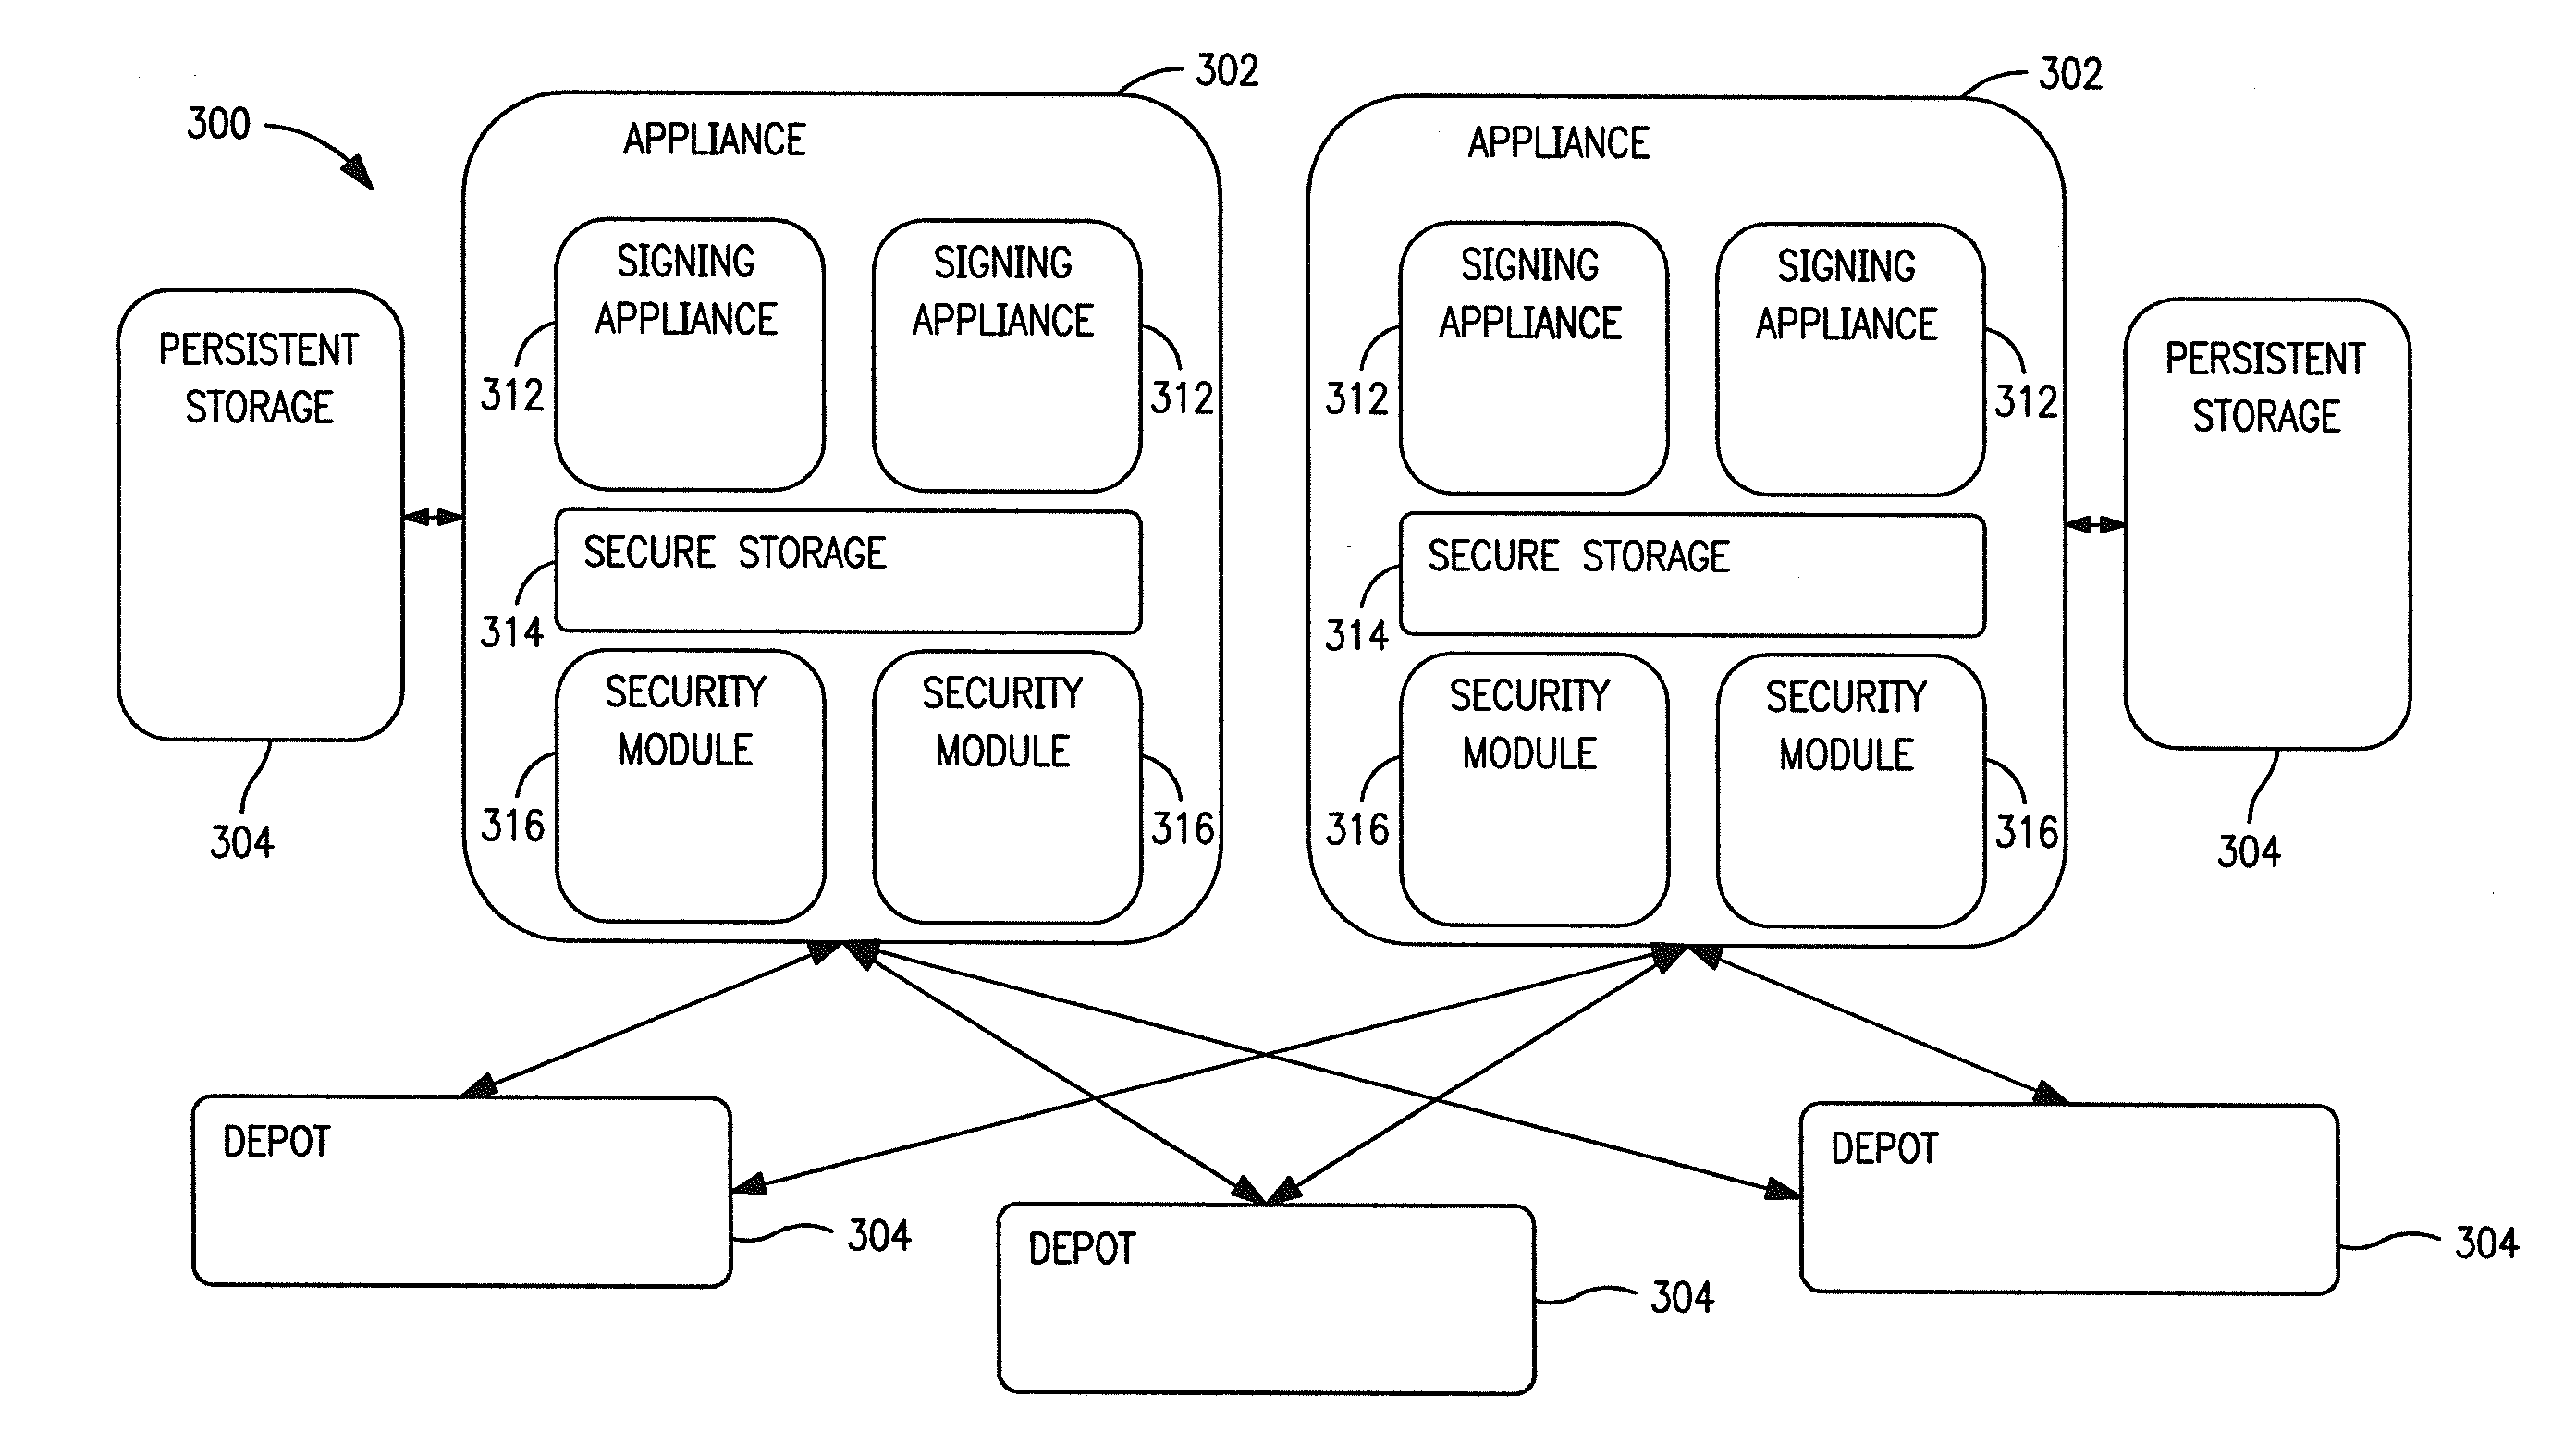 Apparatus and methods for distributing and storing electronic access clients